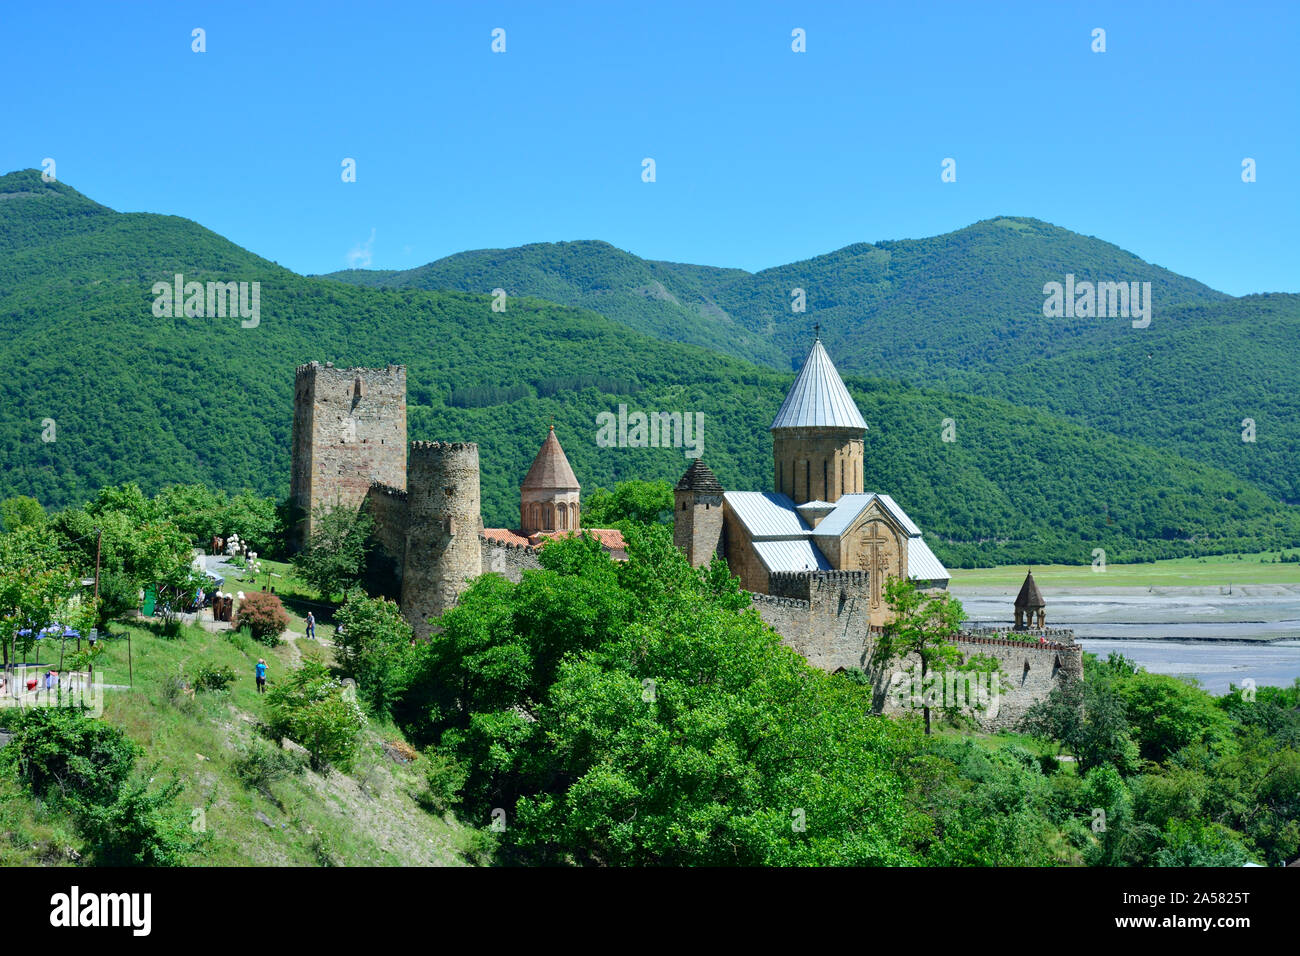 Ananuri castle dating back to the 13th century, on the Aragvi River. Georgia, Caucasus Stock Photo